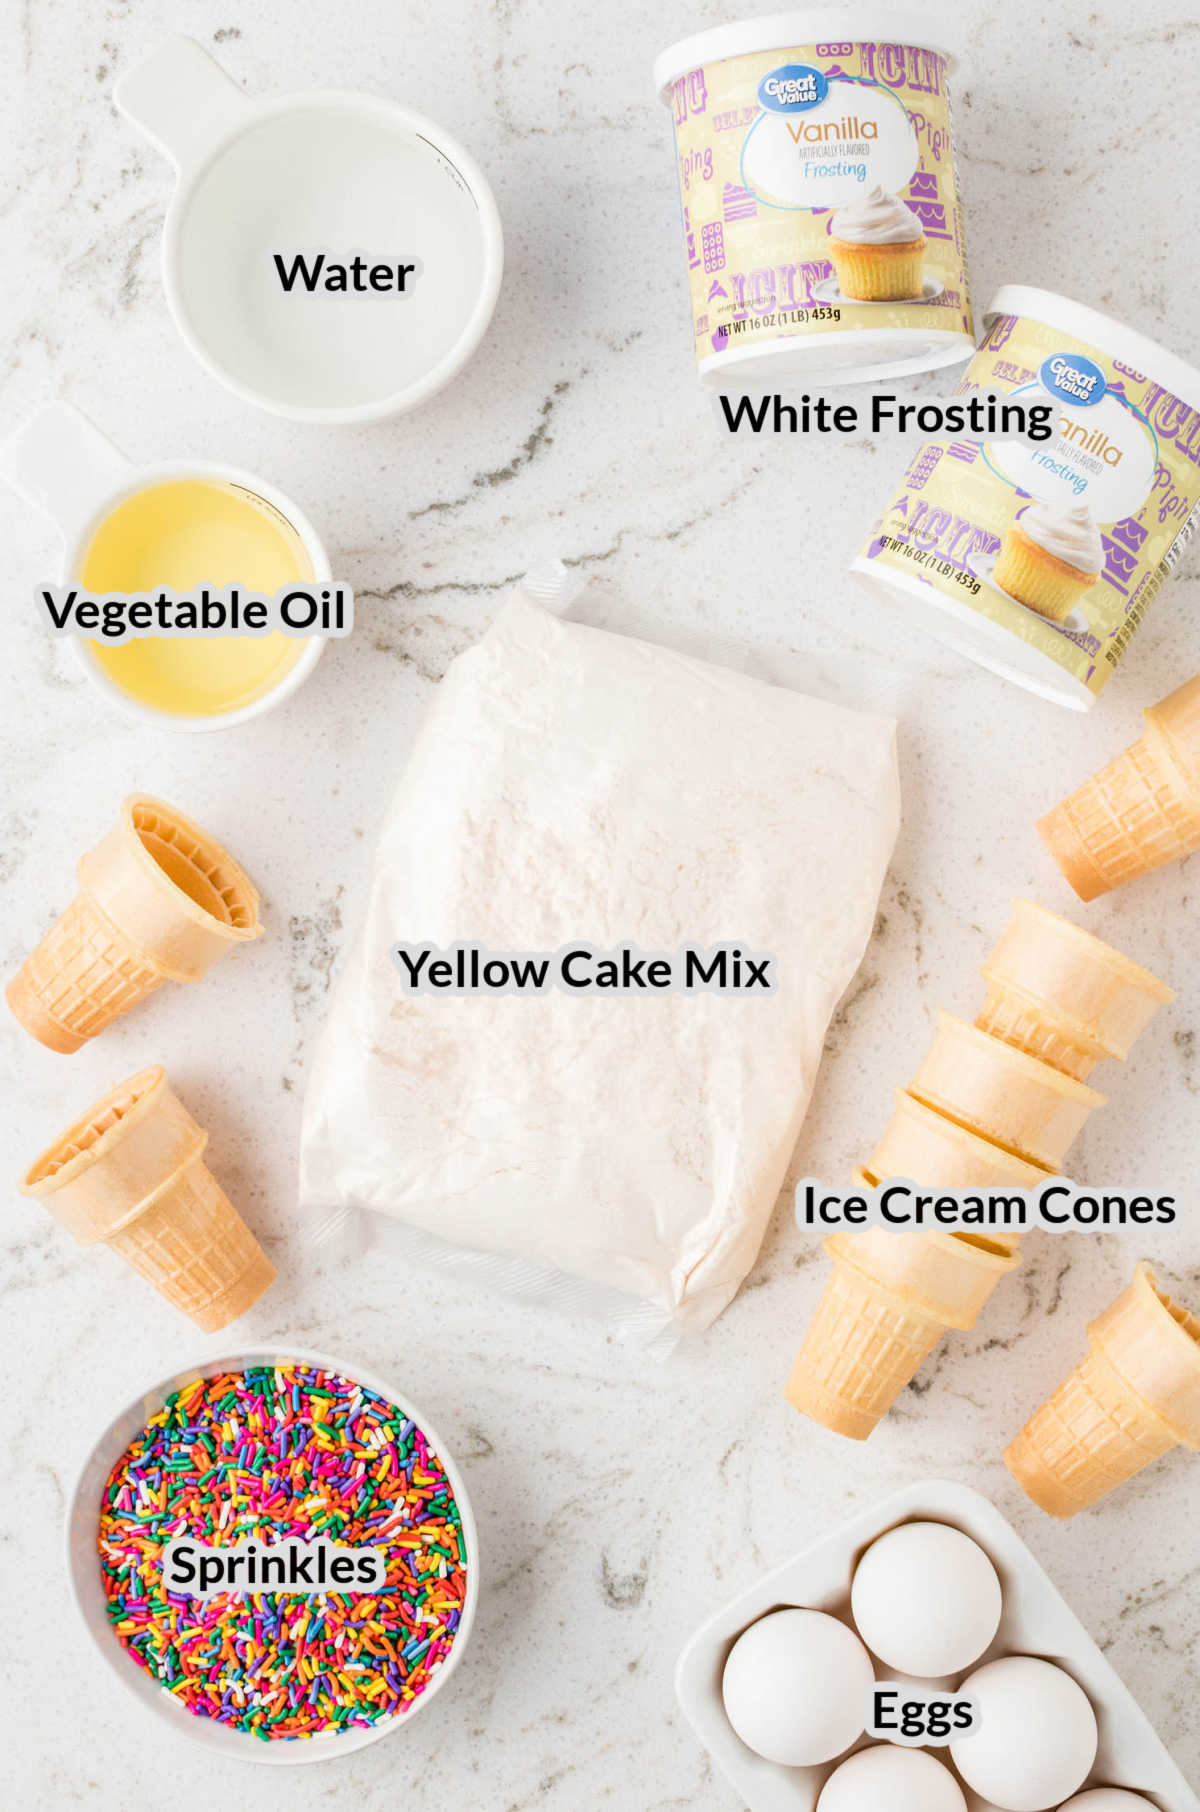 Overhead Image of the Ice Cream Cone Cupcakes Ingredients